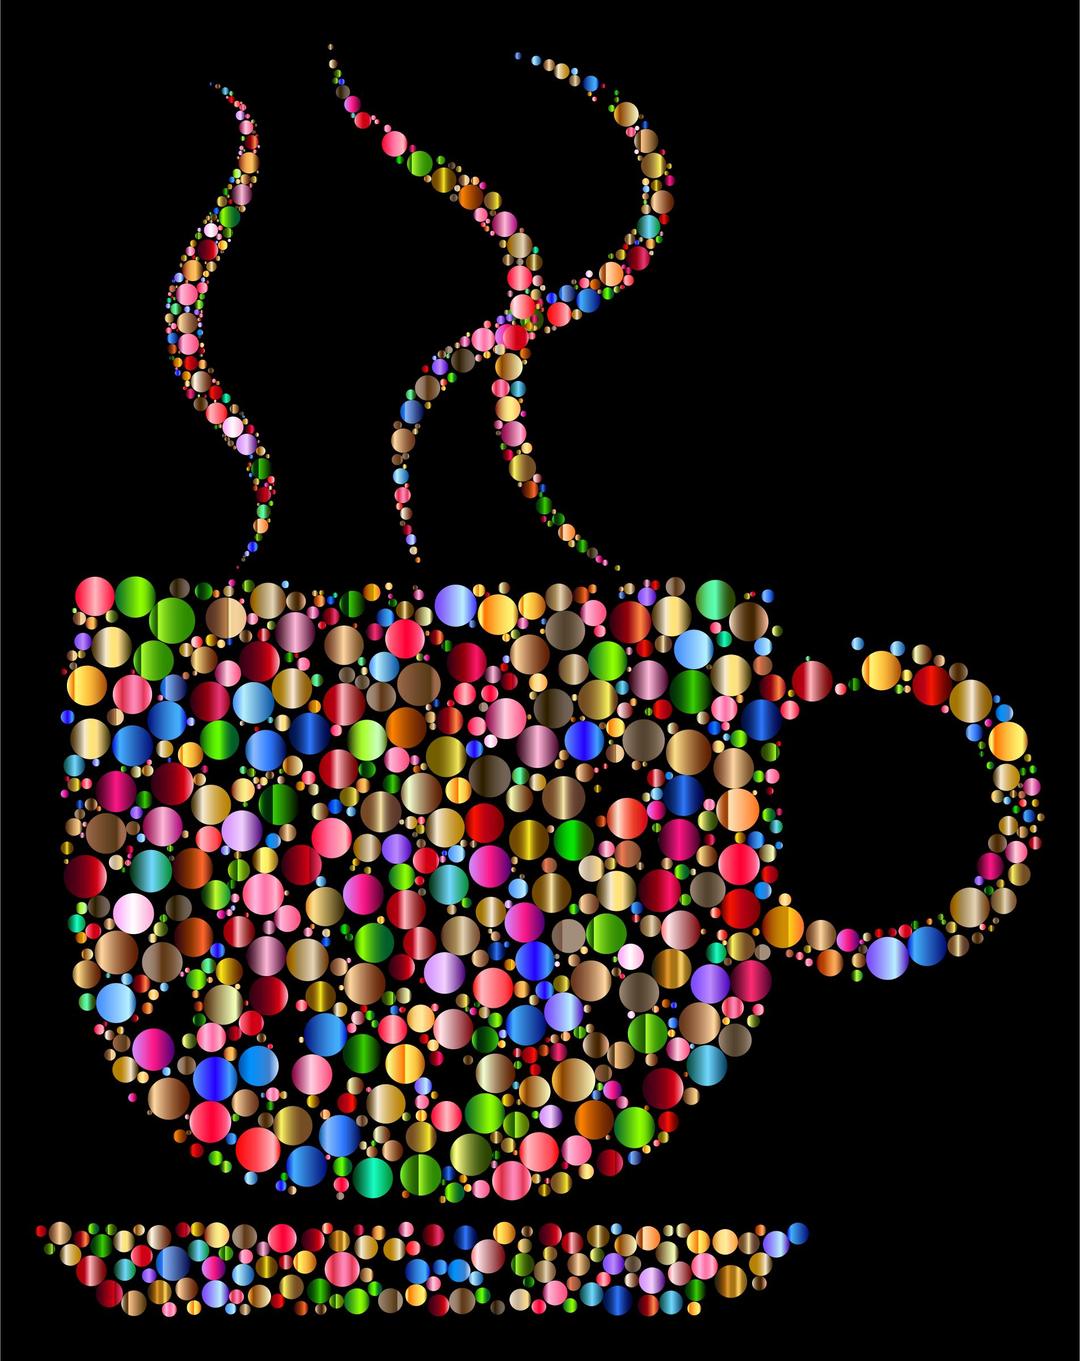 Colorful Coffee Circles 3 With Black Background png transparent